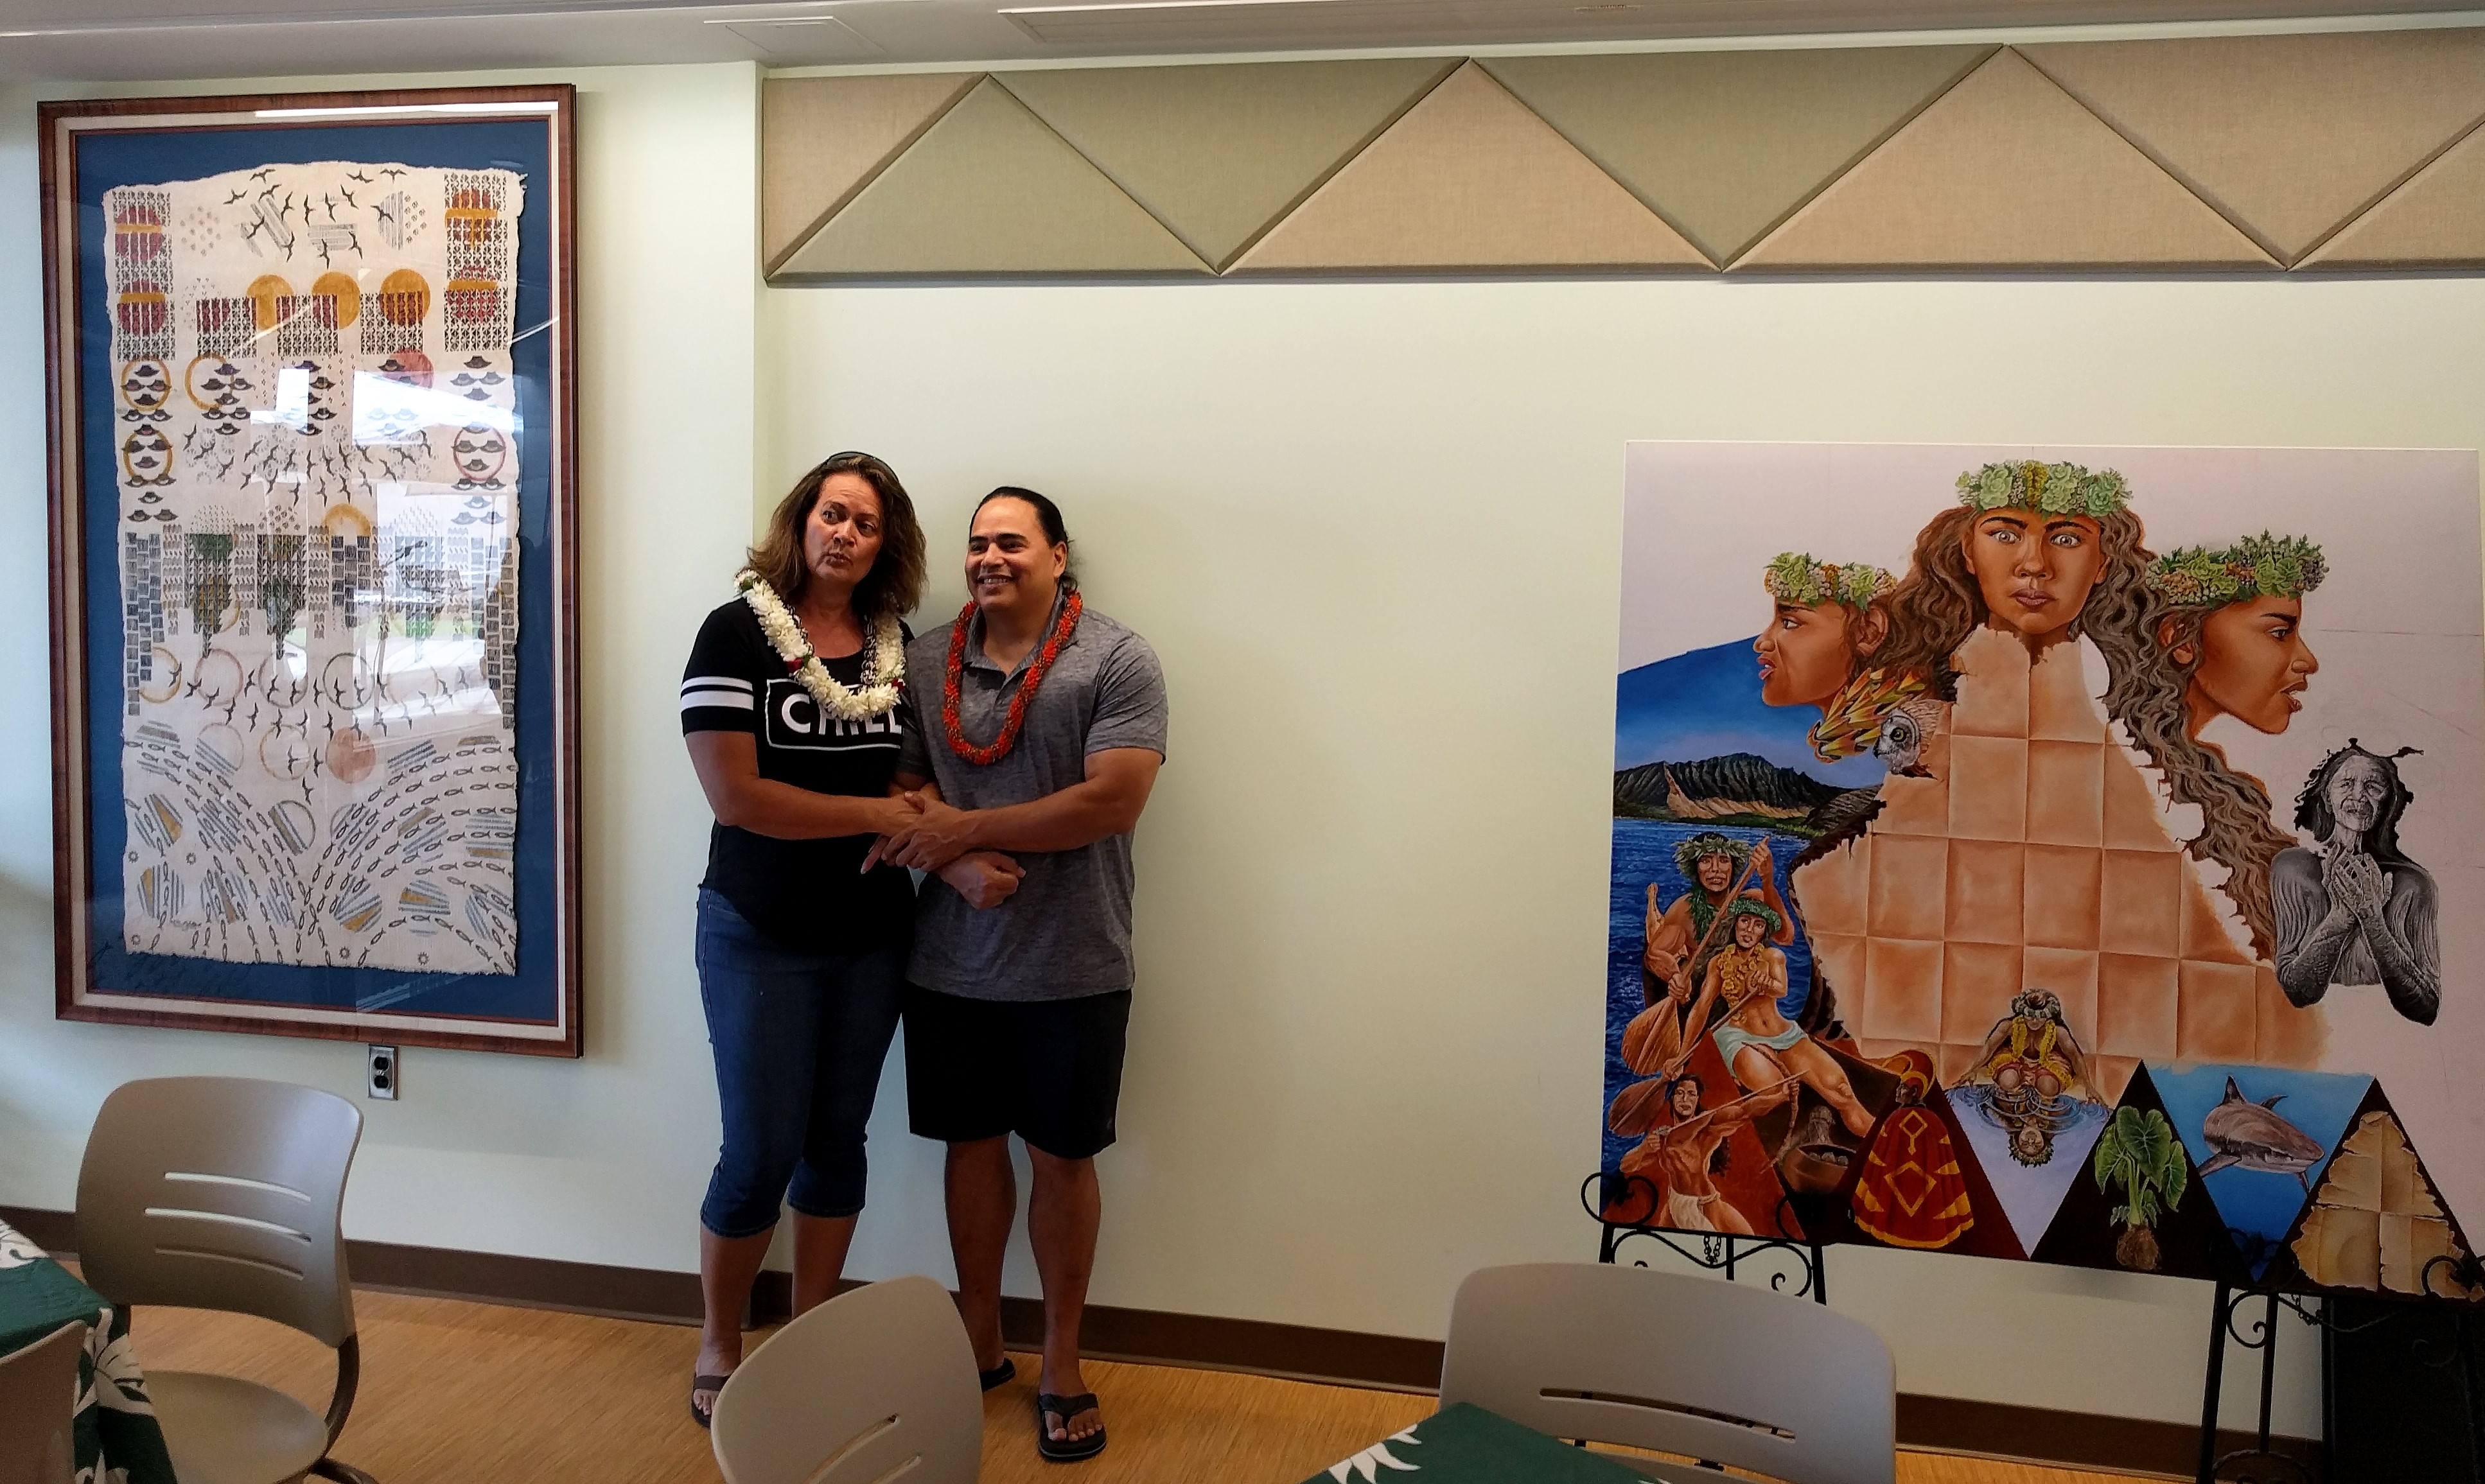 Tanahy (l) and Kupihea pose with their artwork in the Nāulu Center.